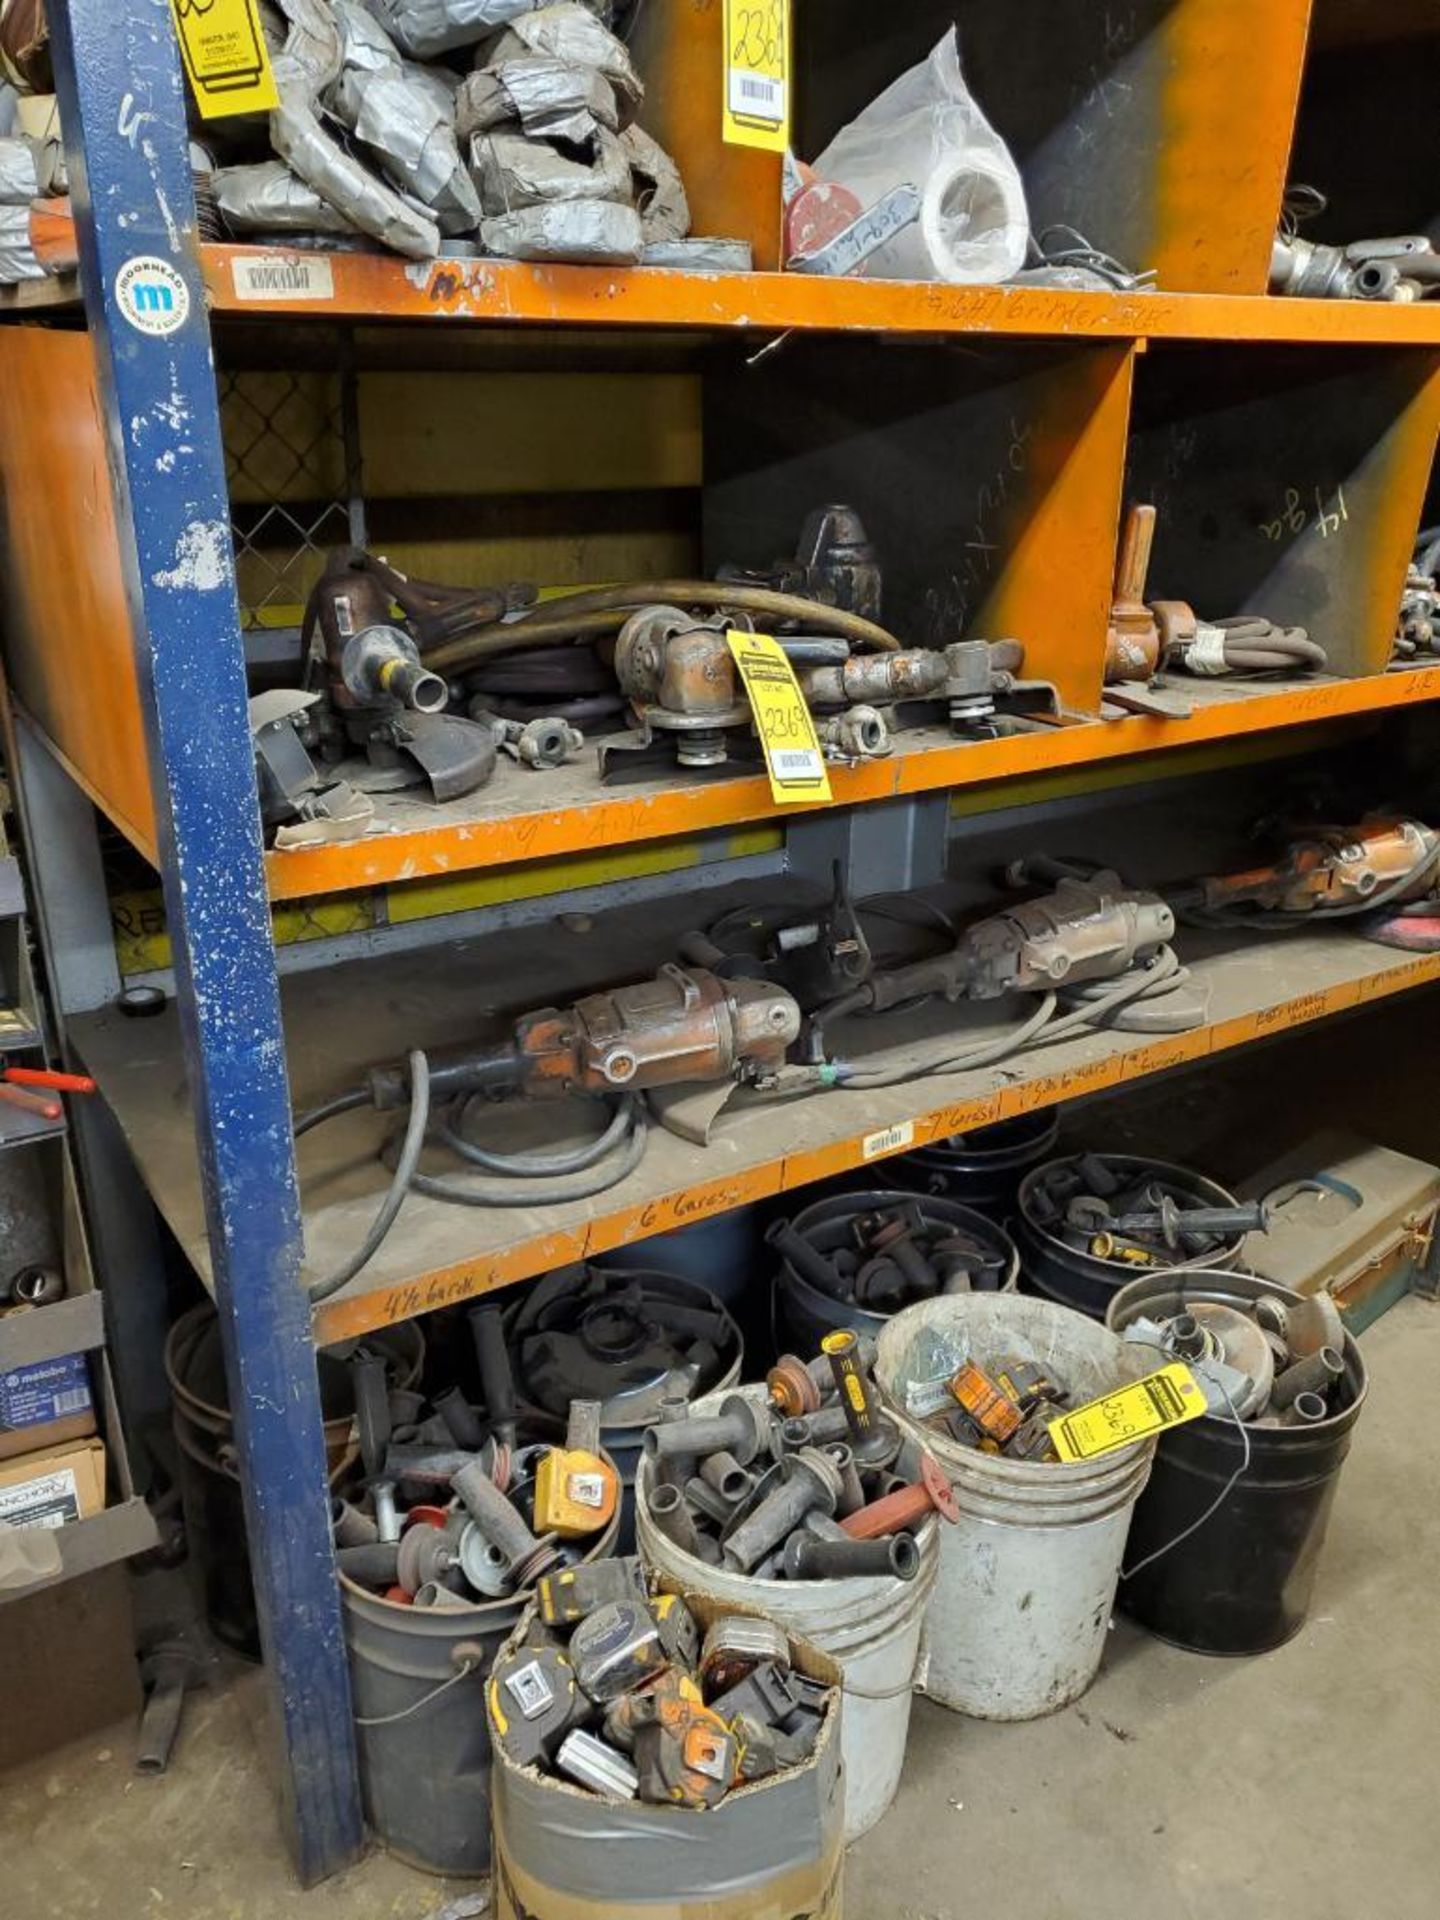 CONTENTS OF SHELVING UNIT, METABO GRINDERS, MILWAUKEE DEEP CUT BAND SAWS, PNEUMATIC METAL CUTTING SA - Image 2 of 18